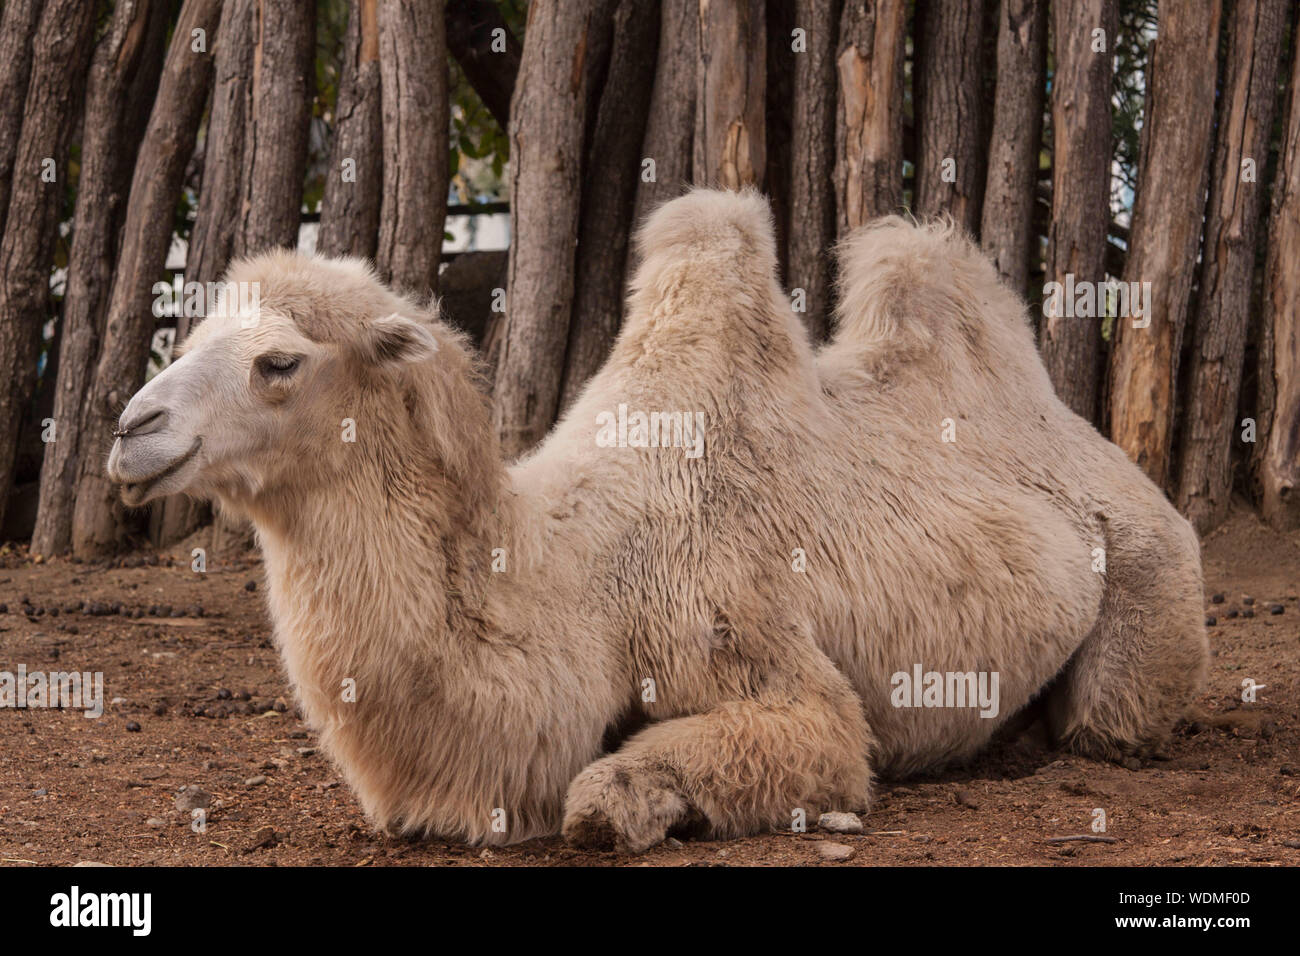 Camel Sleeping High Resolution Stock Photography and Images - Alamy